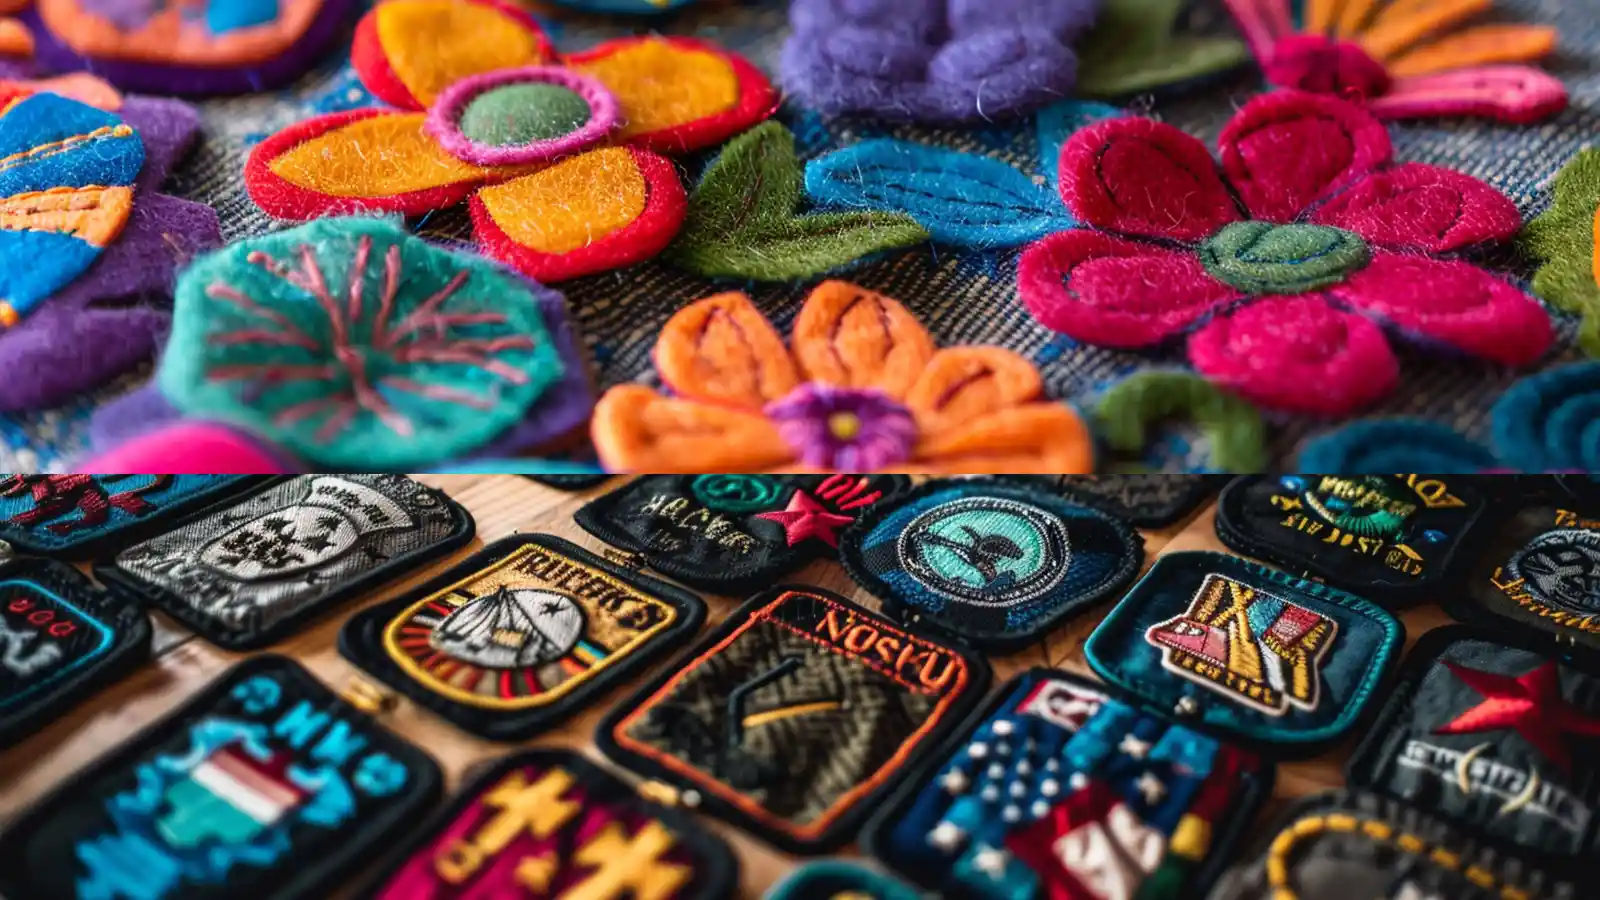 Felt Patch vs. Embroidered Patch: What Sets Them Apart?